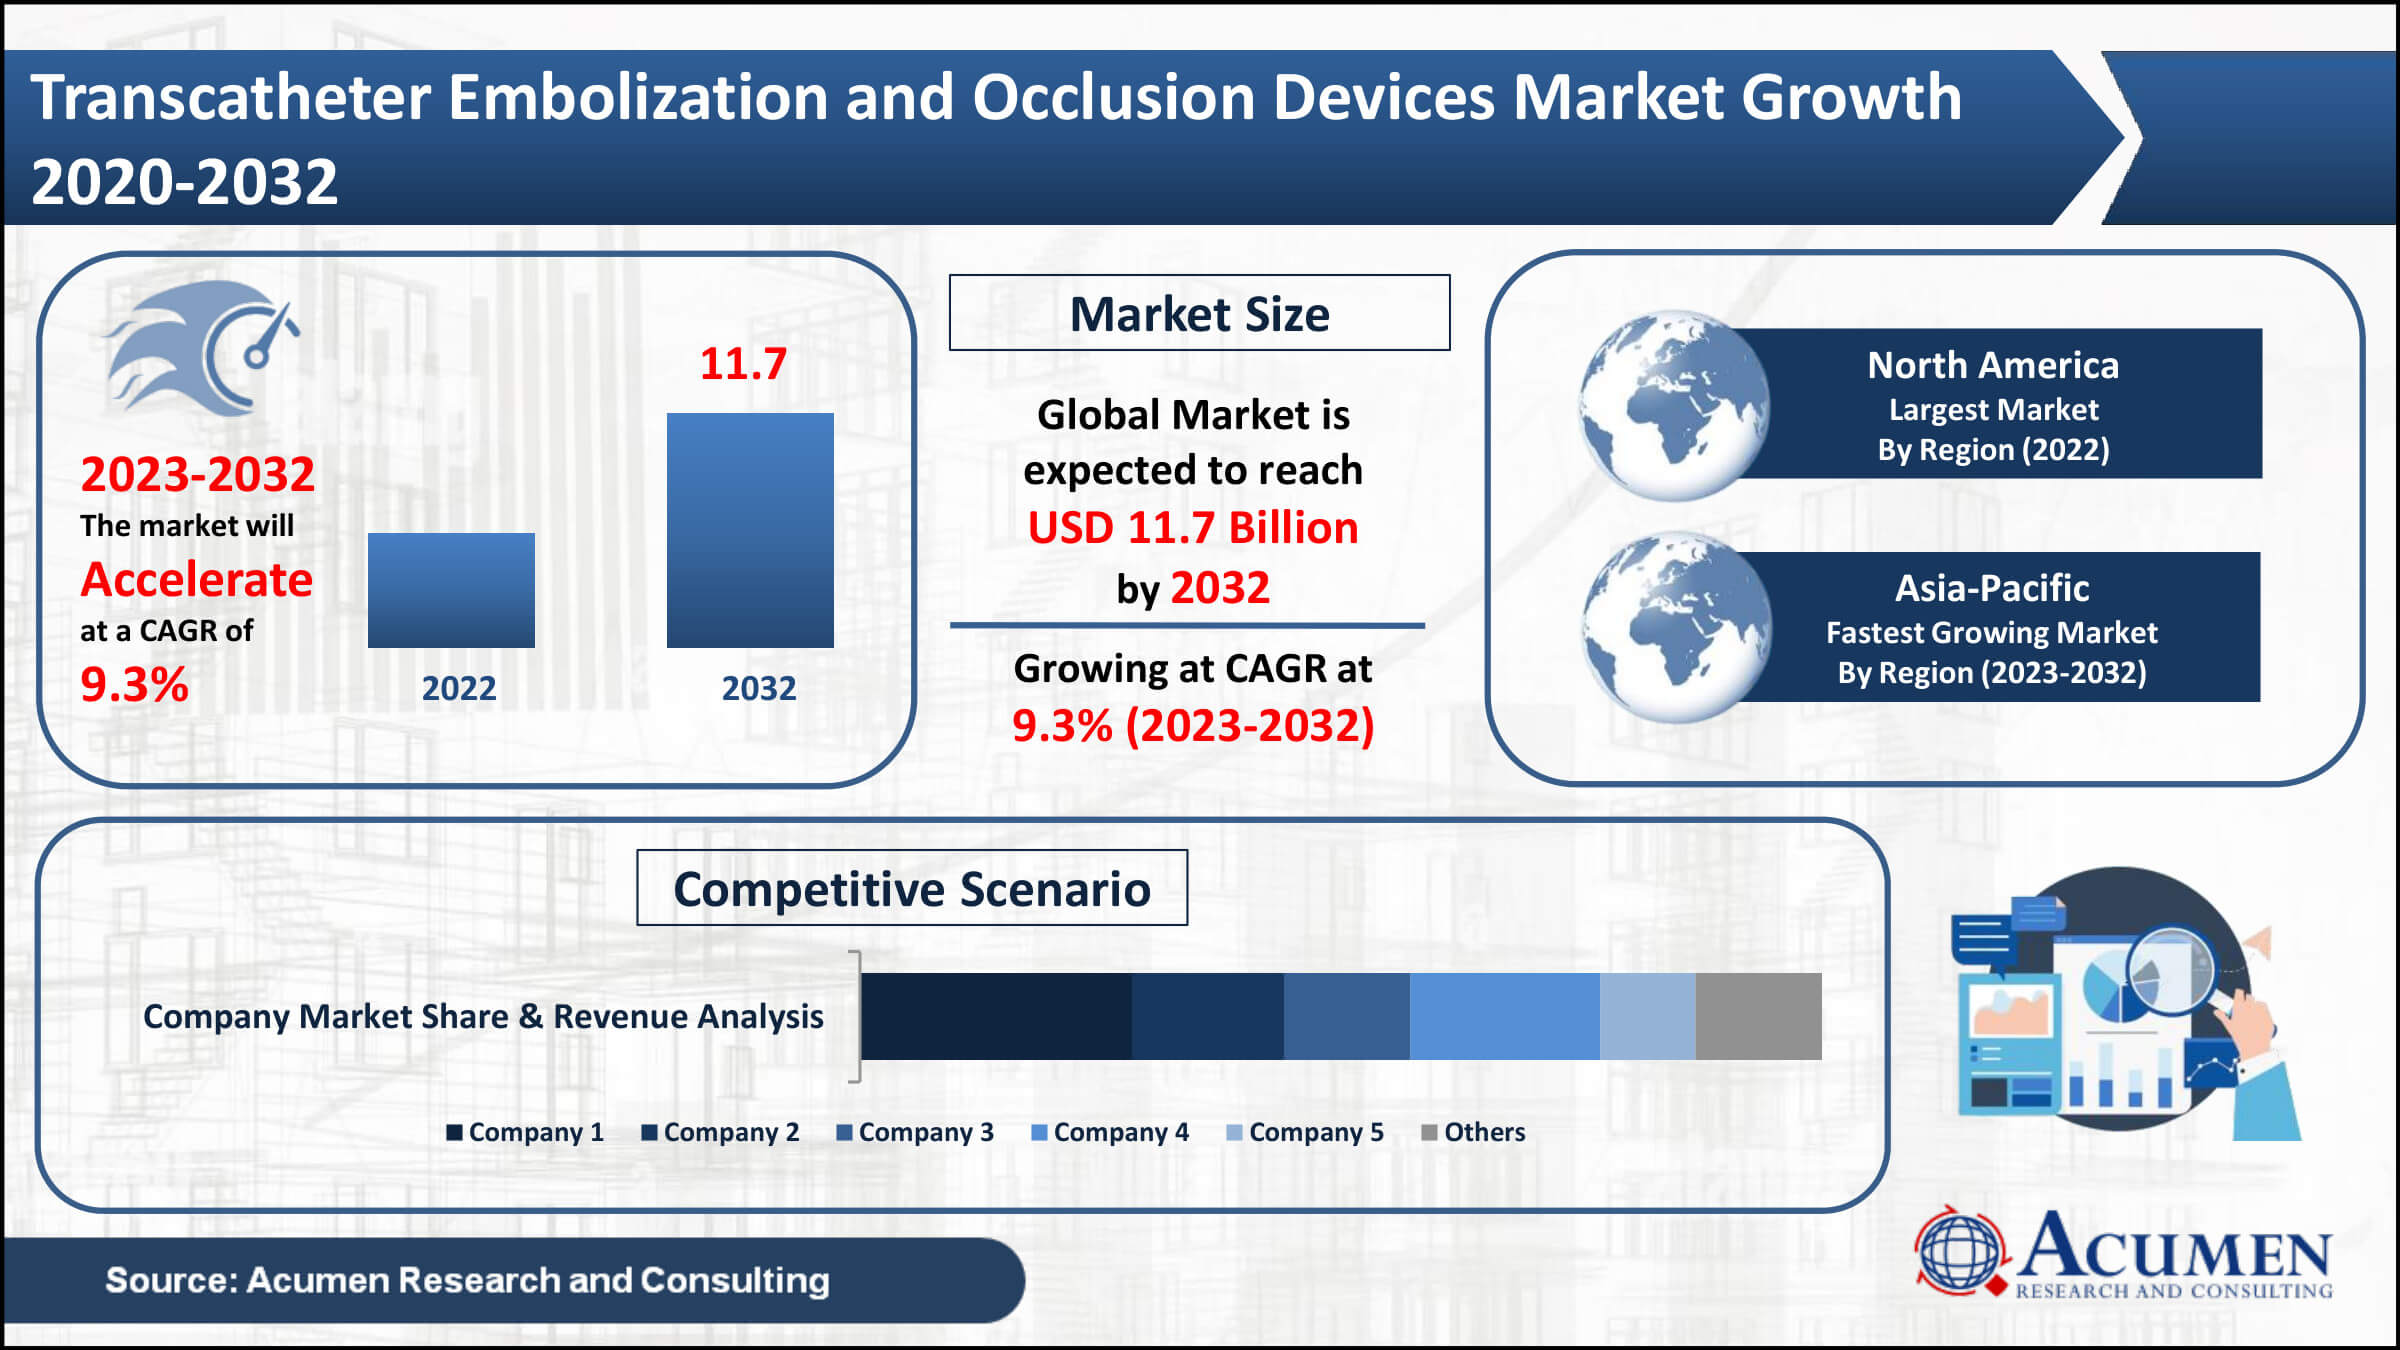 Transcatheter Embolization and Occlusion Devices Market Value